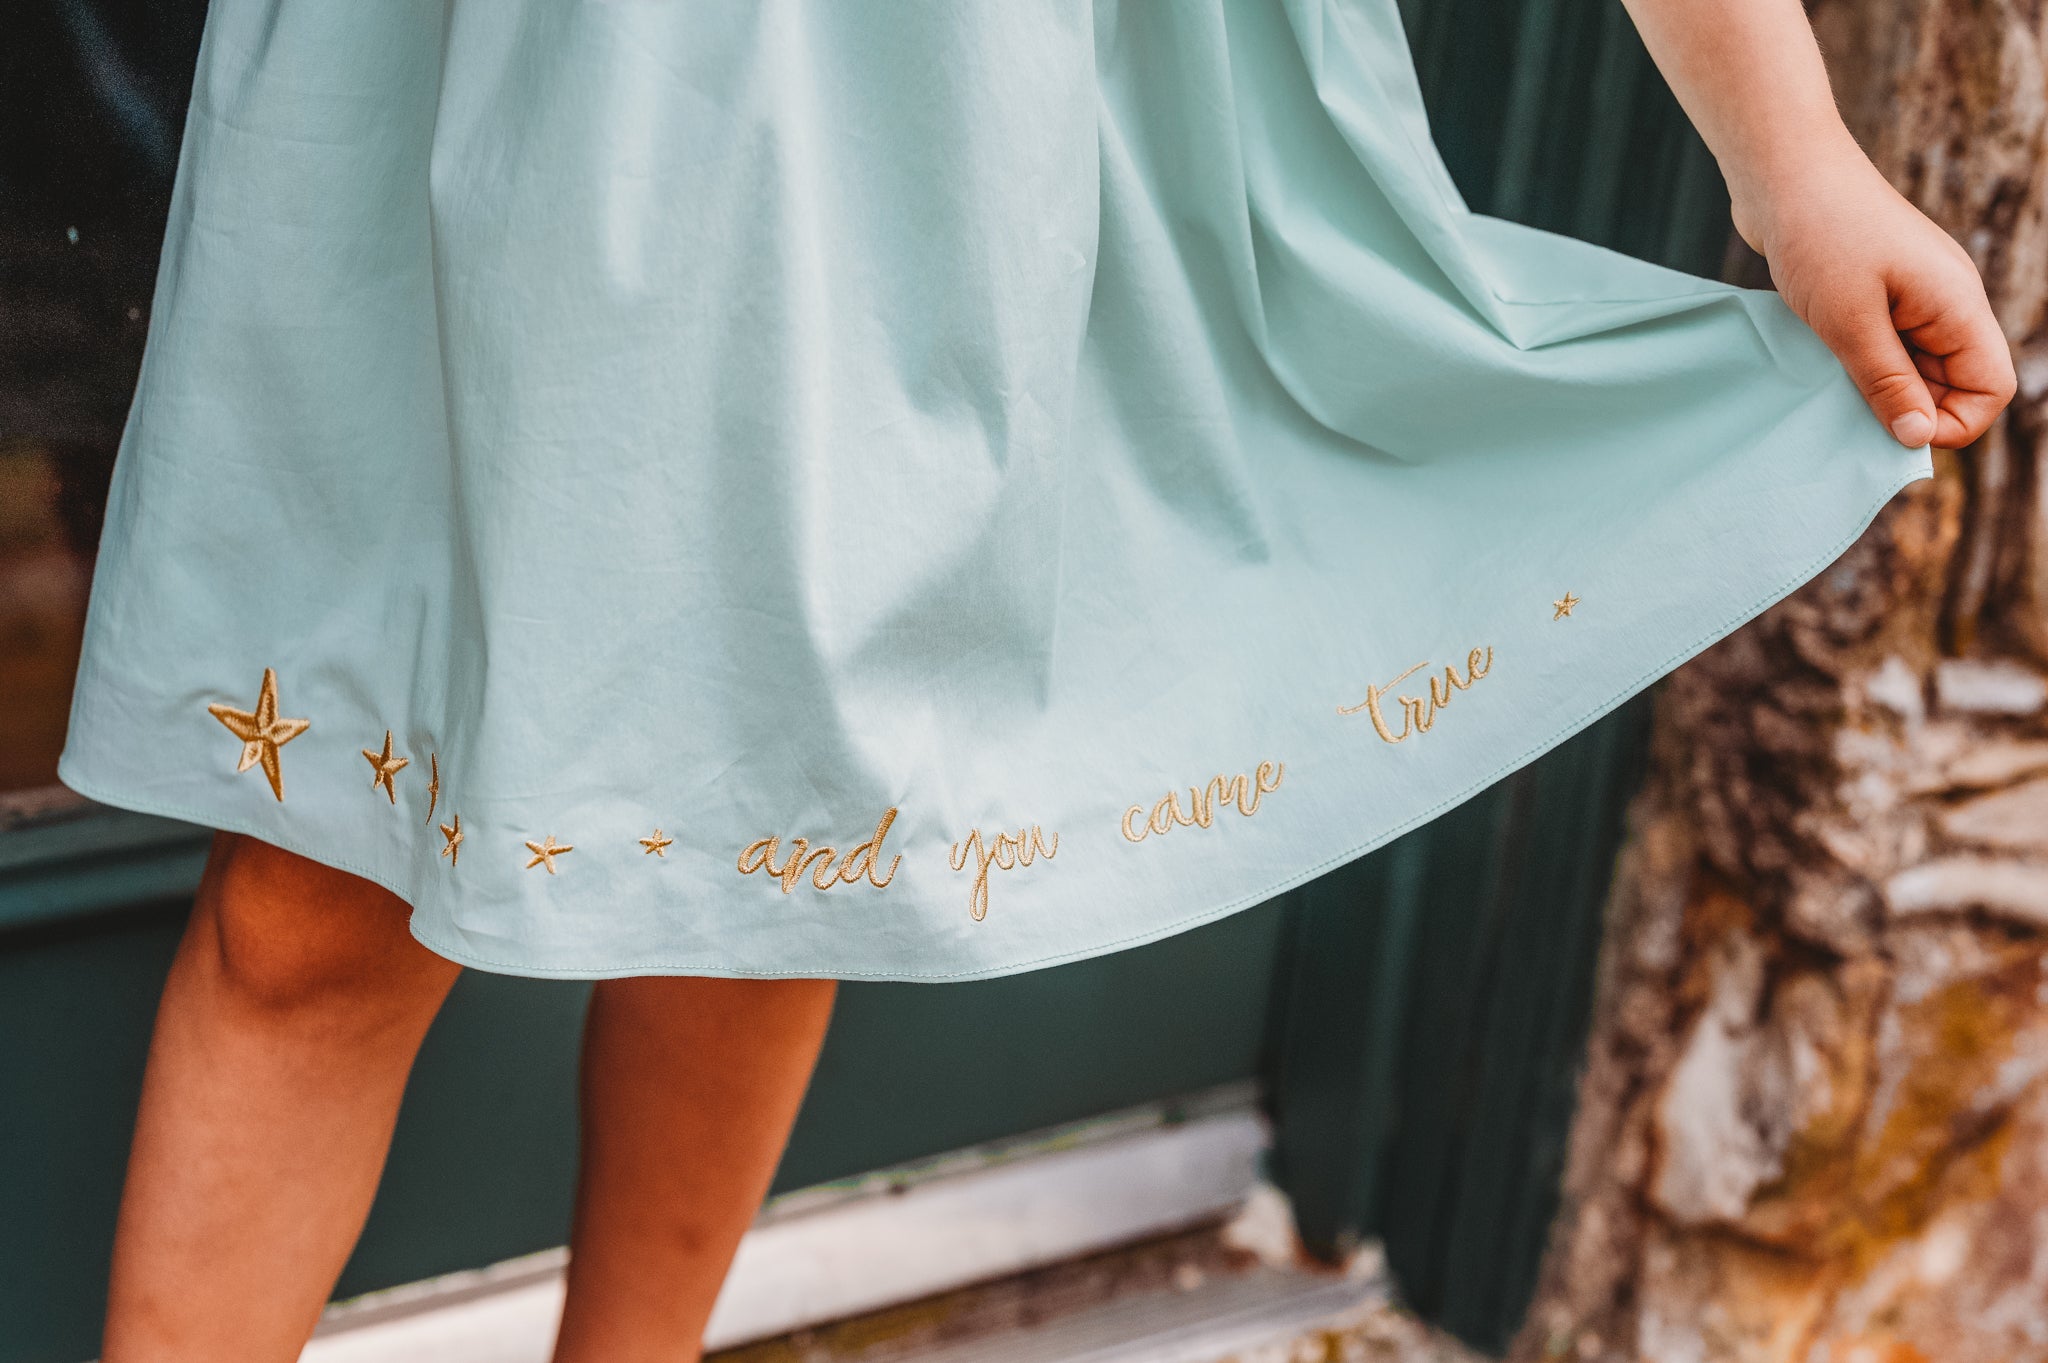 "I Made a Wish" Mint Green Embroidered Dress - Evie's Closet Clothing